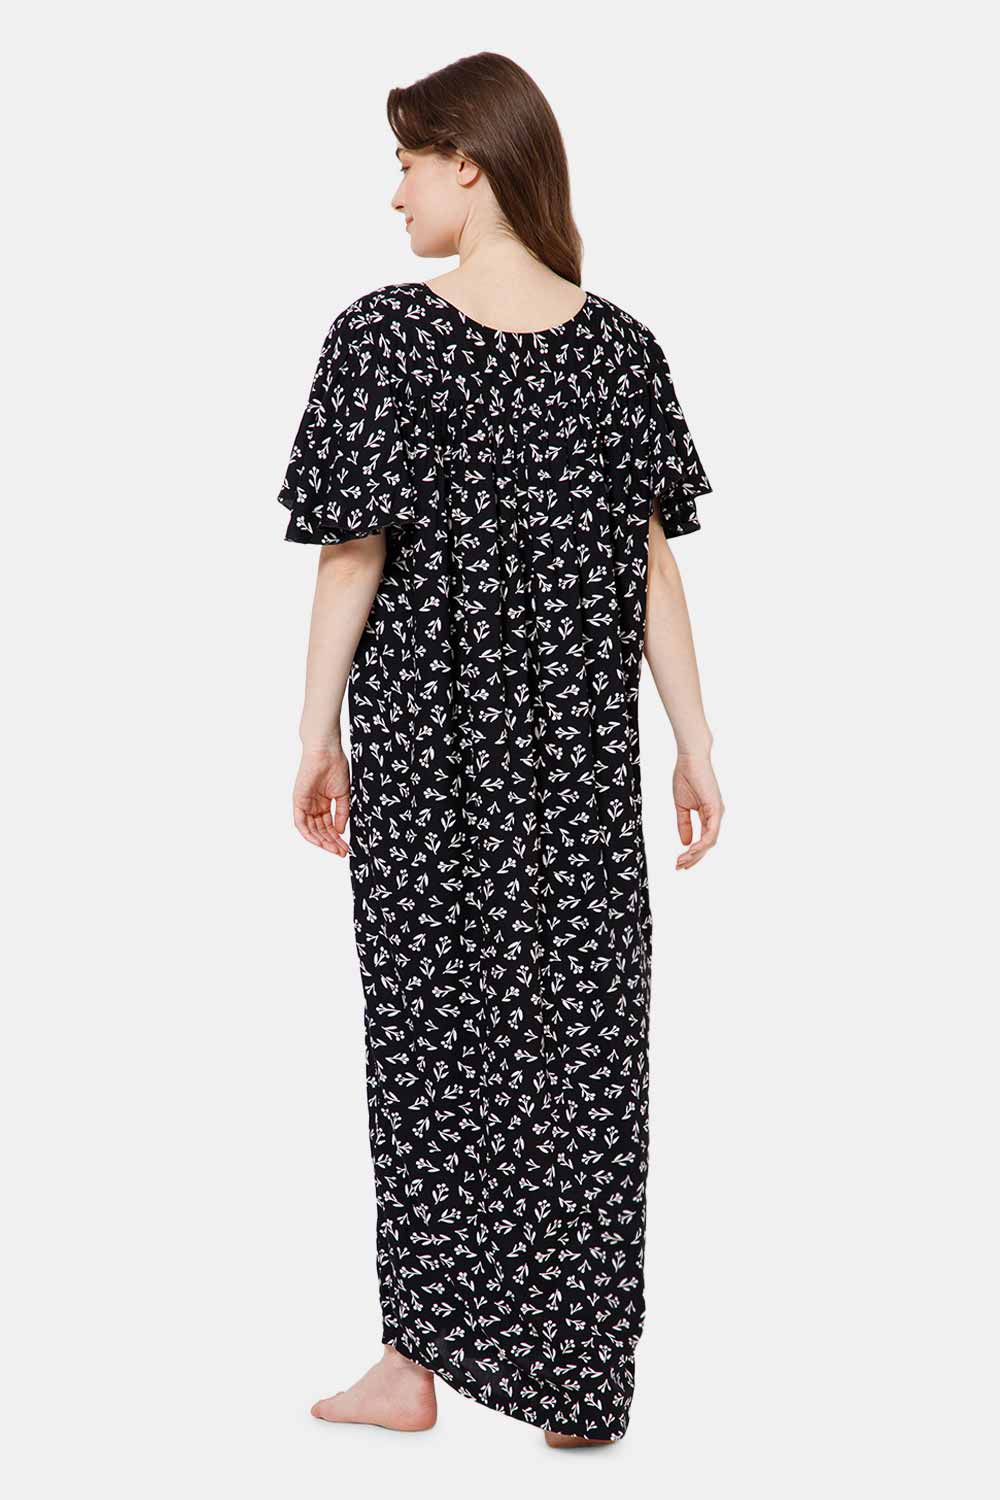 Naidu Hall All Over Printed Nighty with Butterfly Sleeves Diamond Neck - Black print-2 - NT37